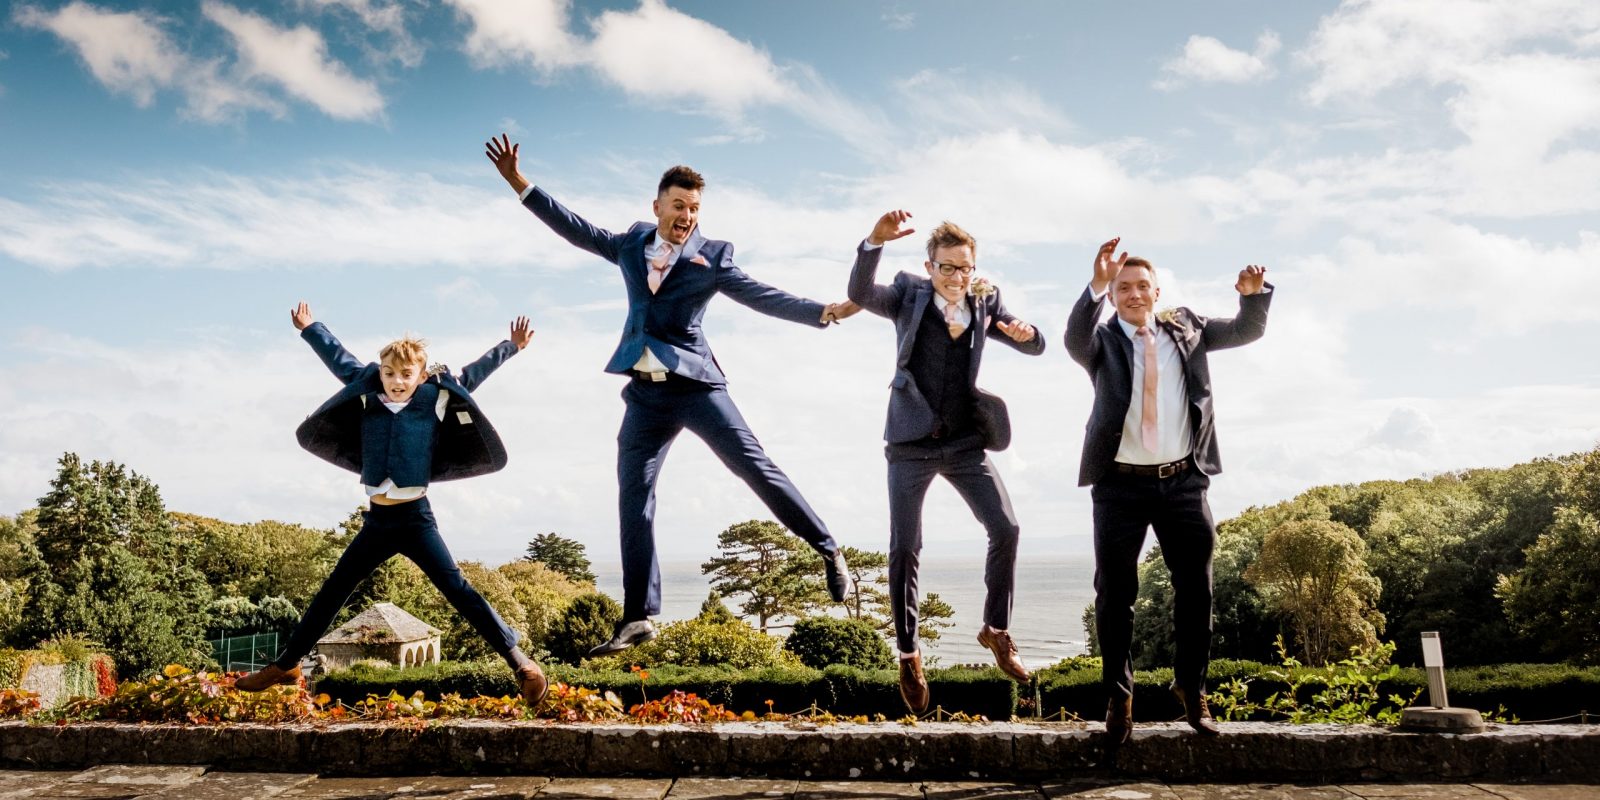 grooms jumping wedding photography